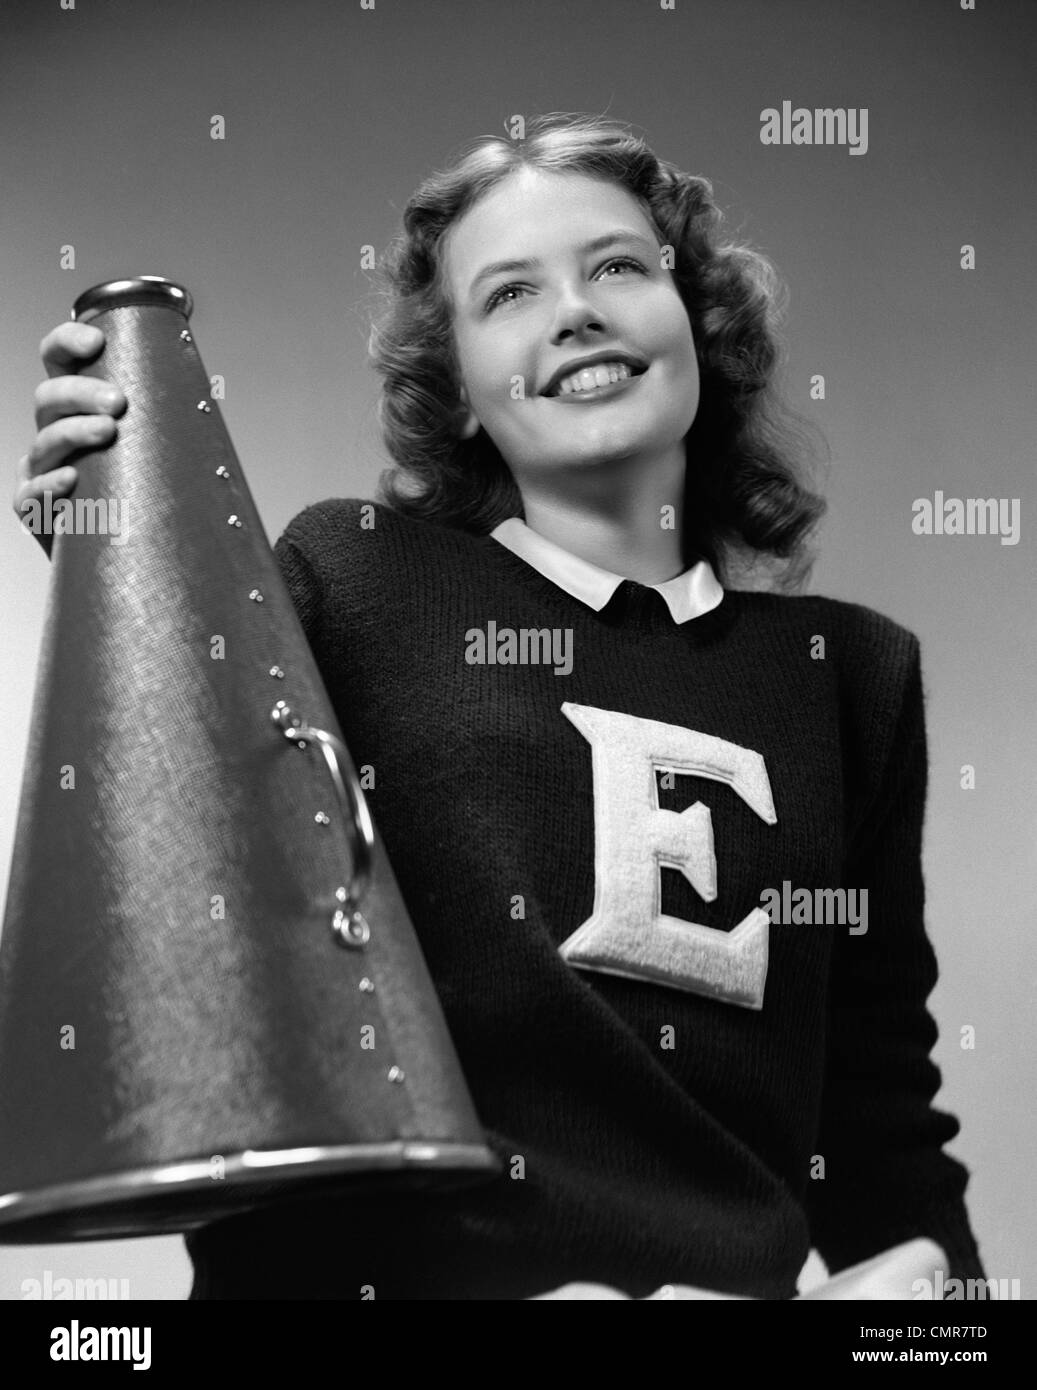 1940s SMILING GIRL WEARING A VARSITY SWEATER WITH THE LETTER E ON FRONT HOLDING A MEGAPHONE WITH HER RIGHT HAND Stock Photo